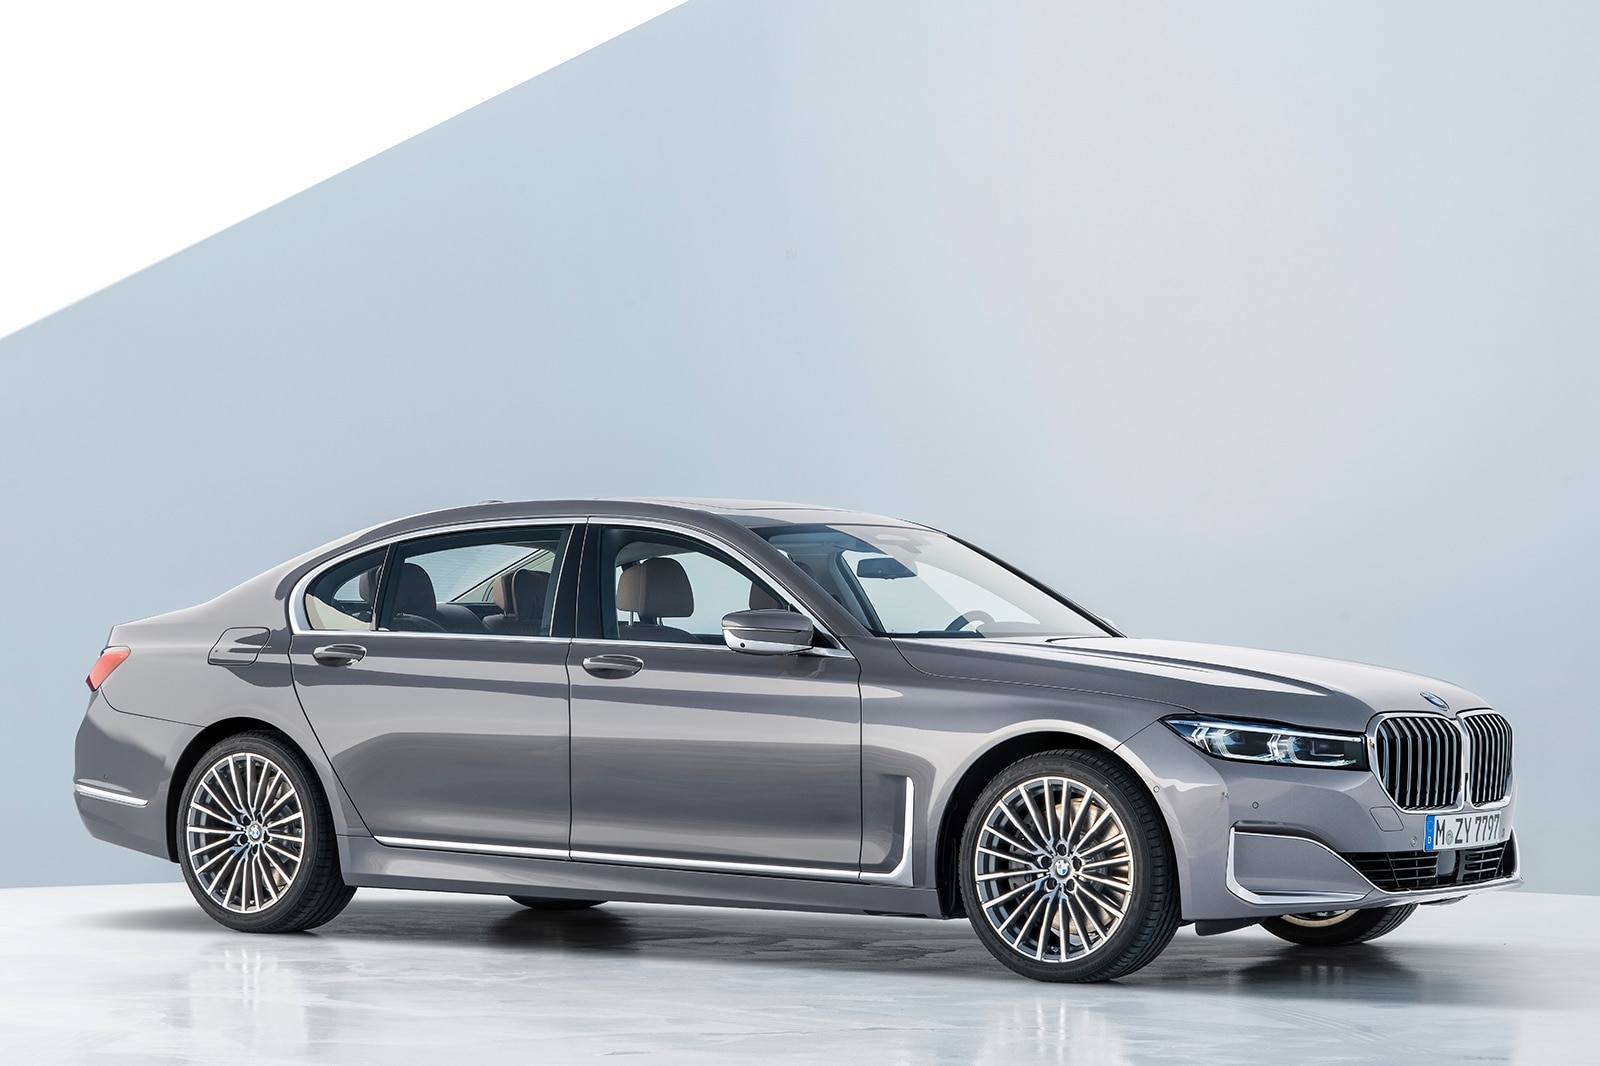 The Luxury Of A 2020 BMW 7 Series
: Unparalleled Excellence